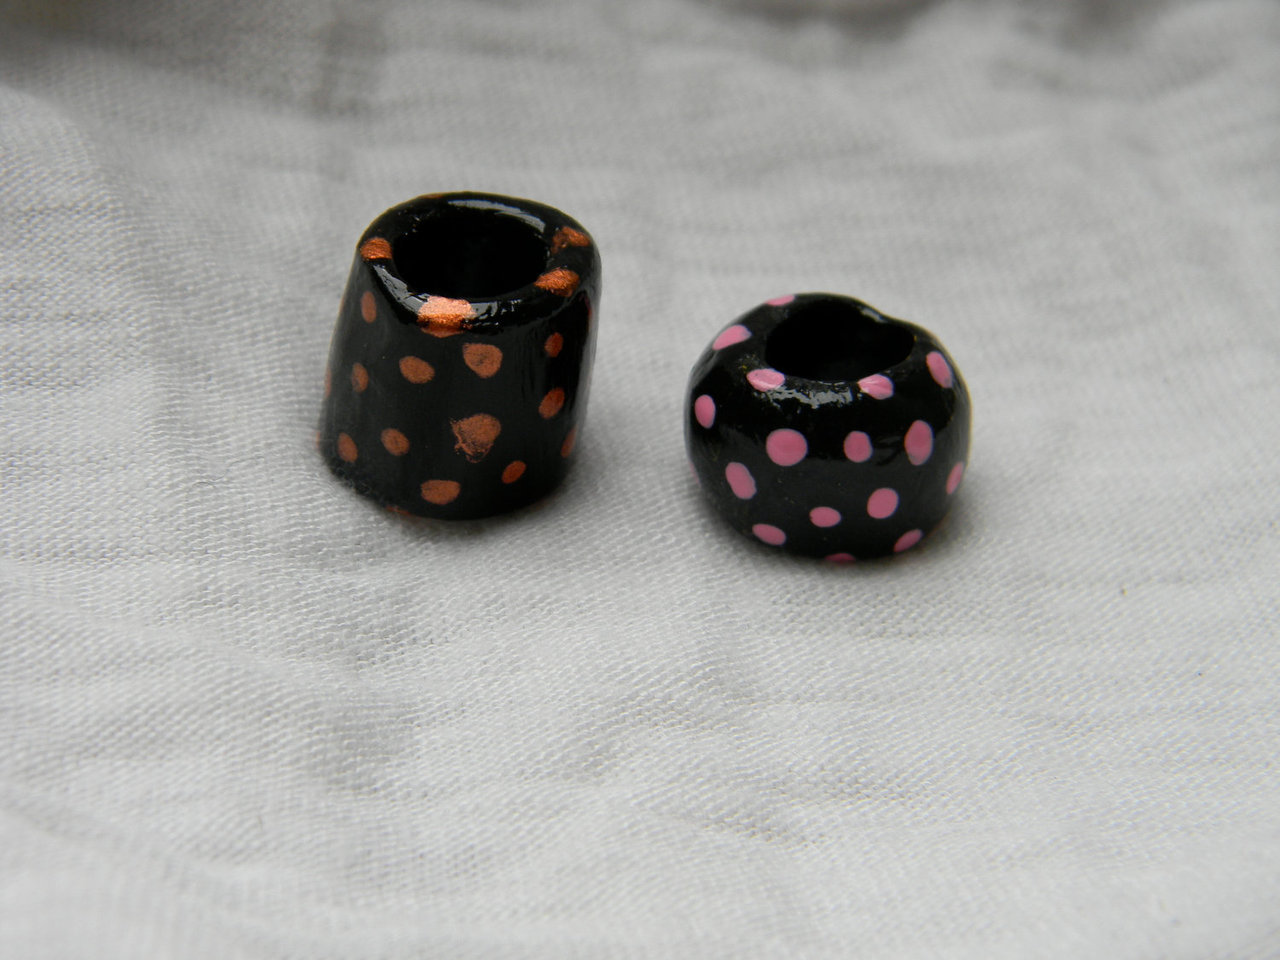 I have an Etsy shop, Spiniflora Emporium, where I currently sell dreadlock beads!